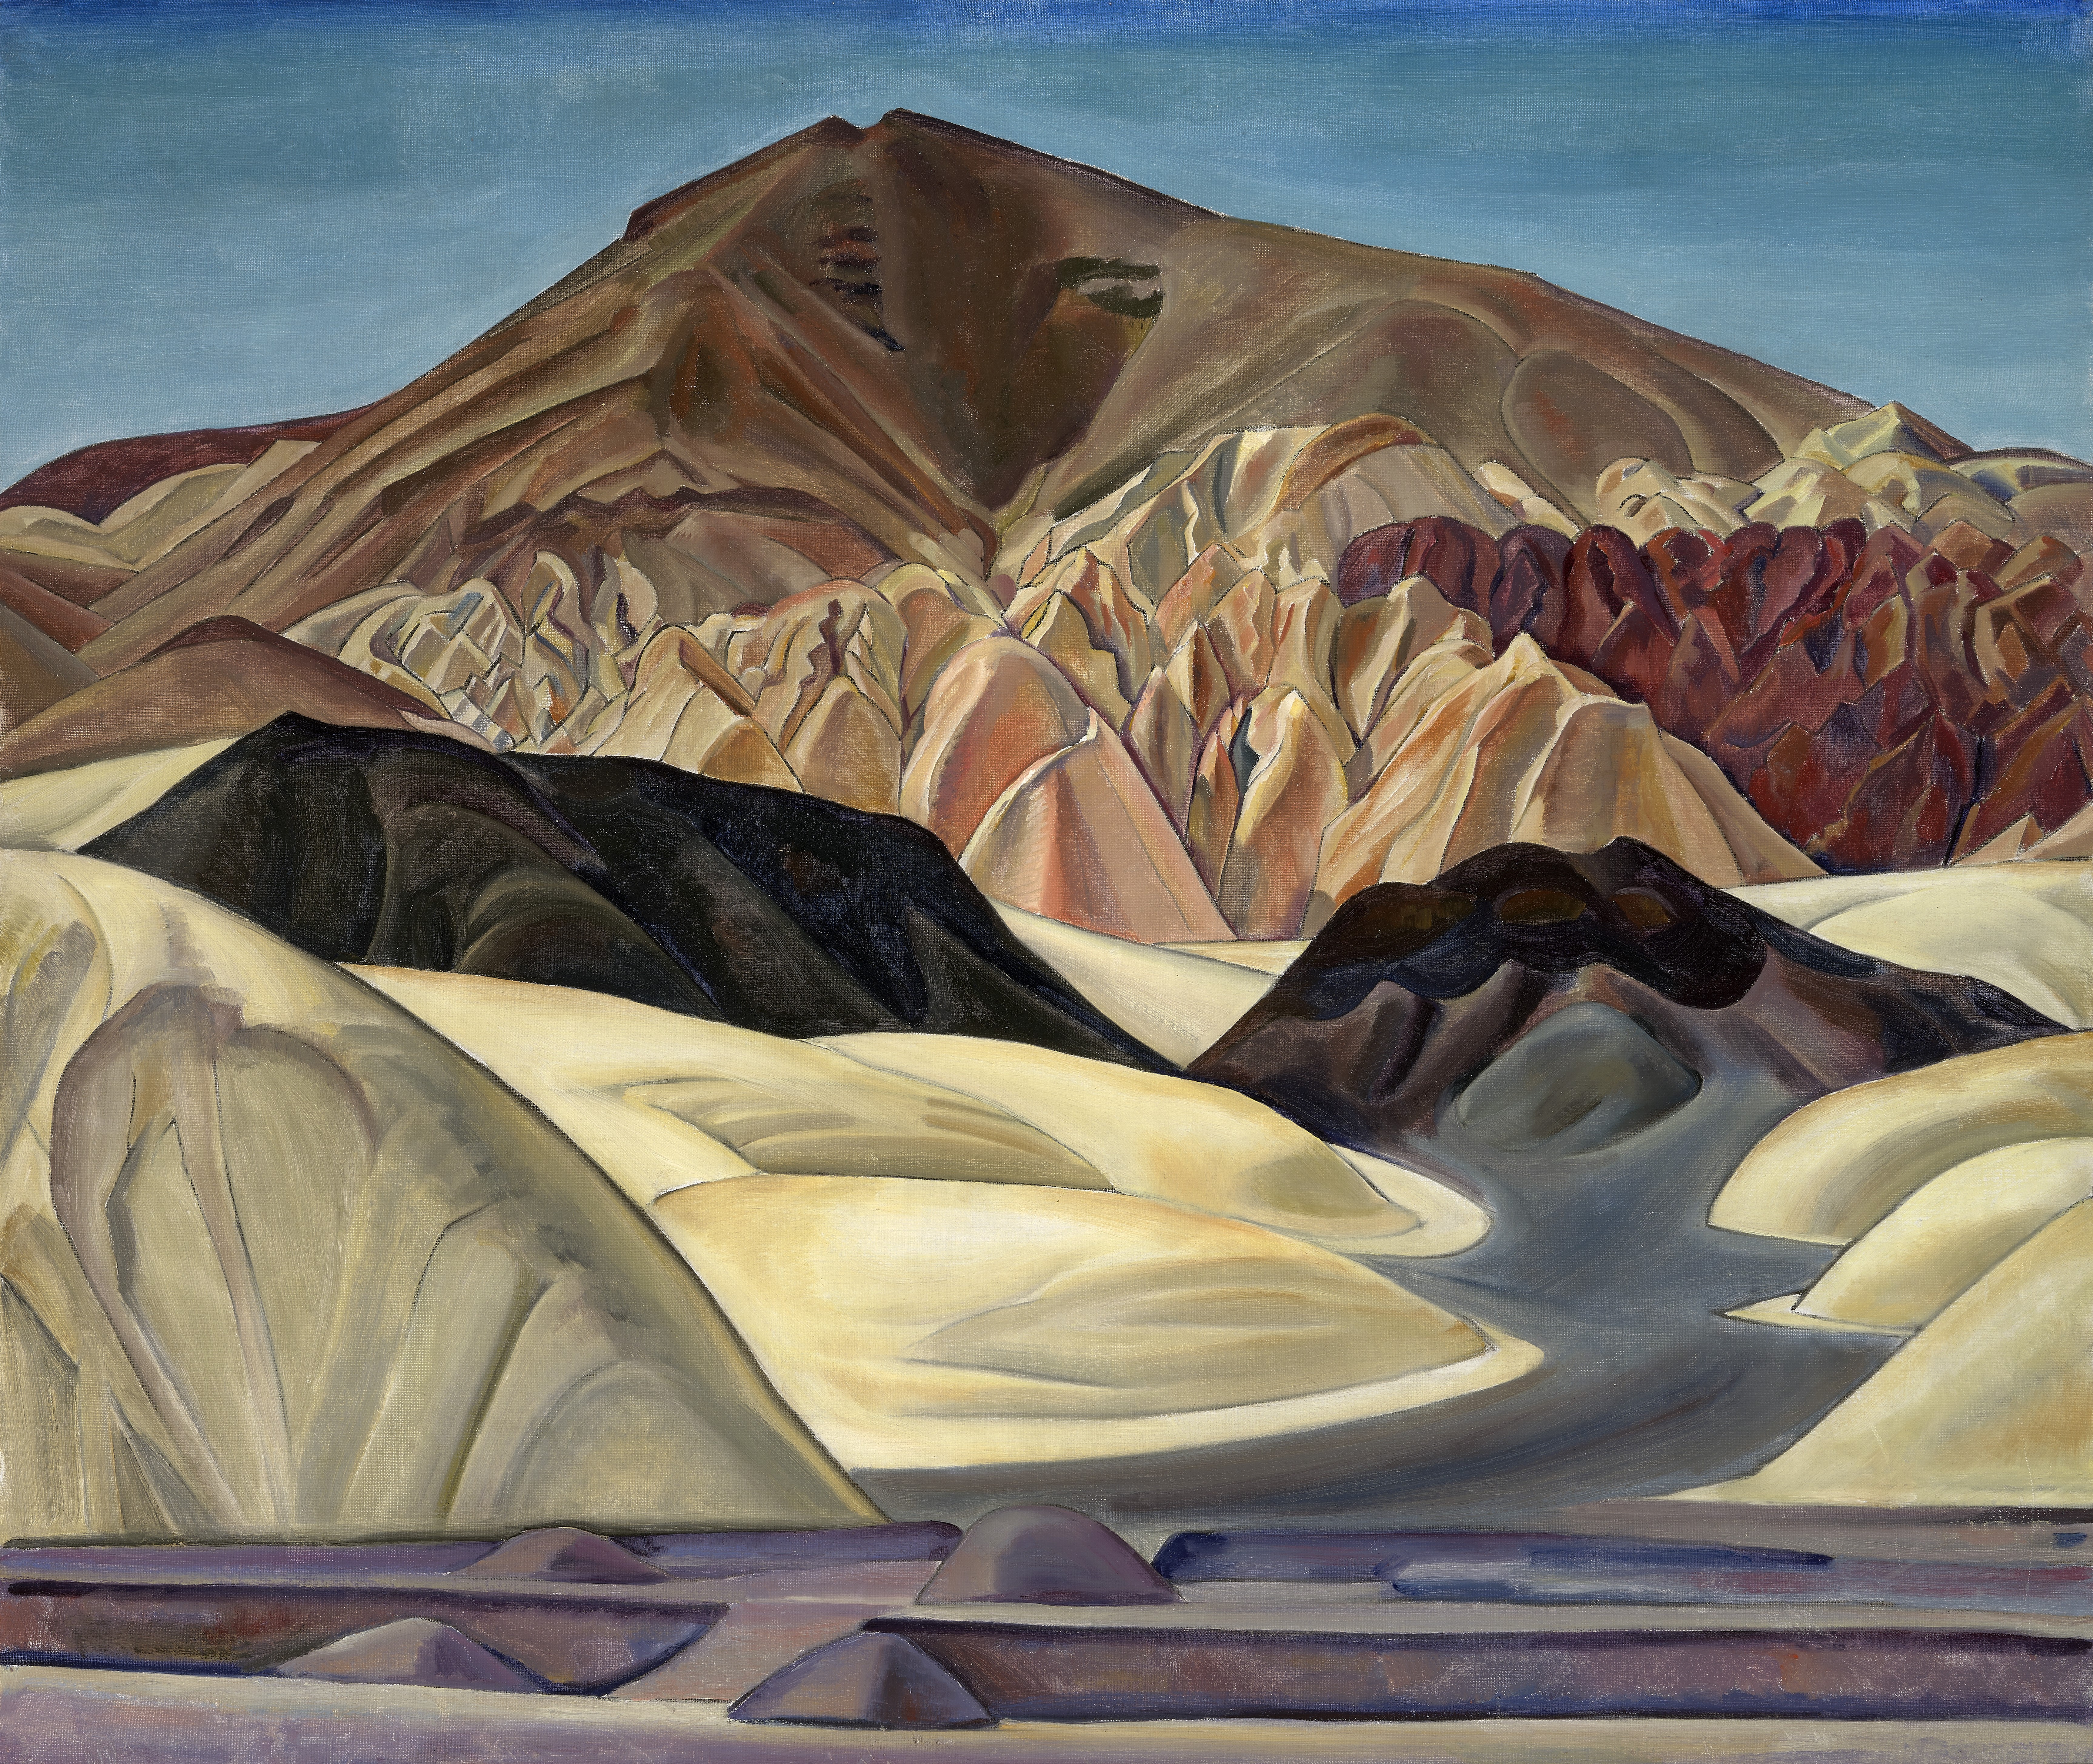 Helen Forbes (1891-1945), A Vale in Death Valley, 1939. Oil on canvas, 34" x 40". From the collection of Sandra and Bram Dijkstra.